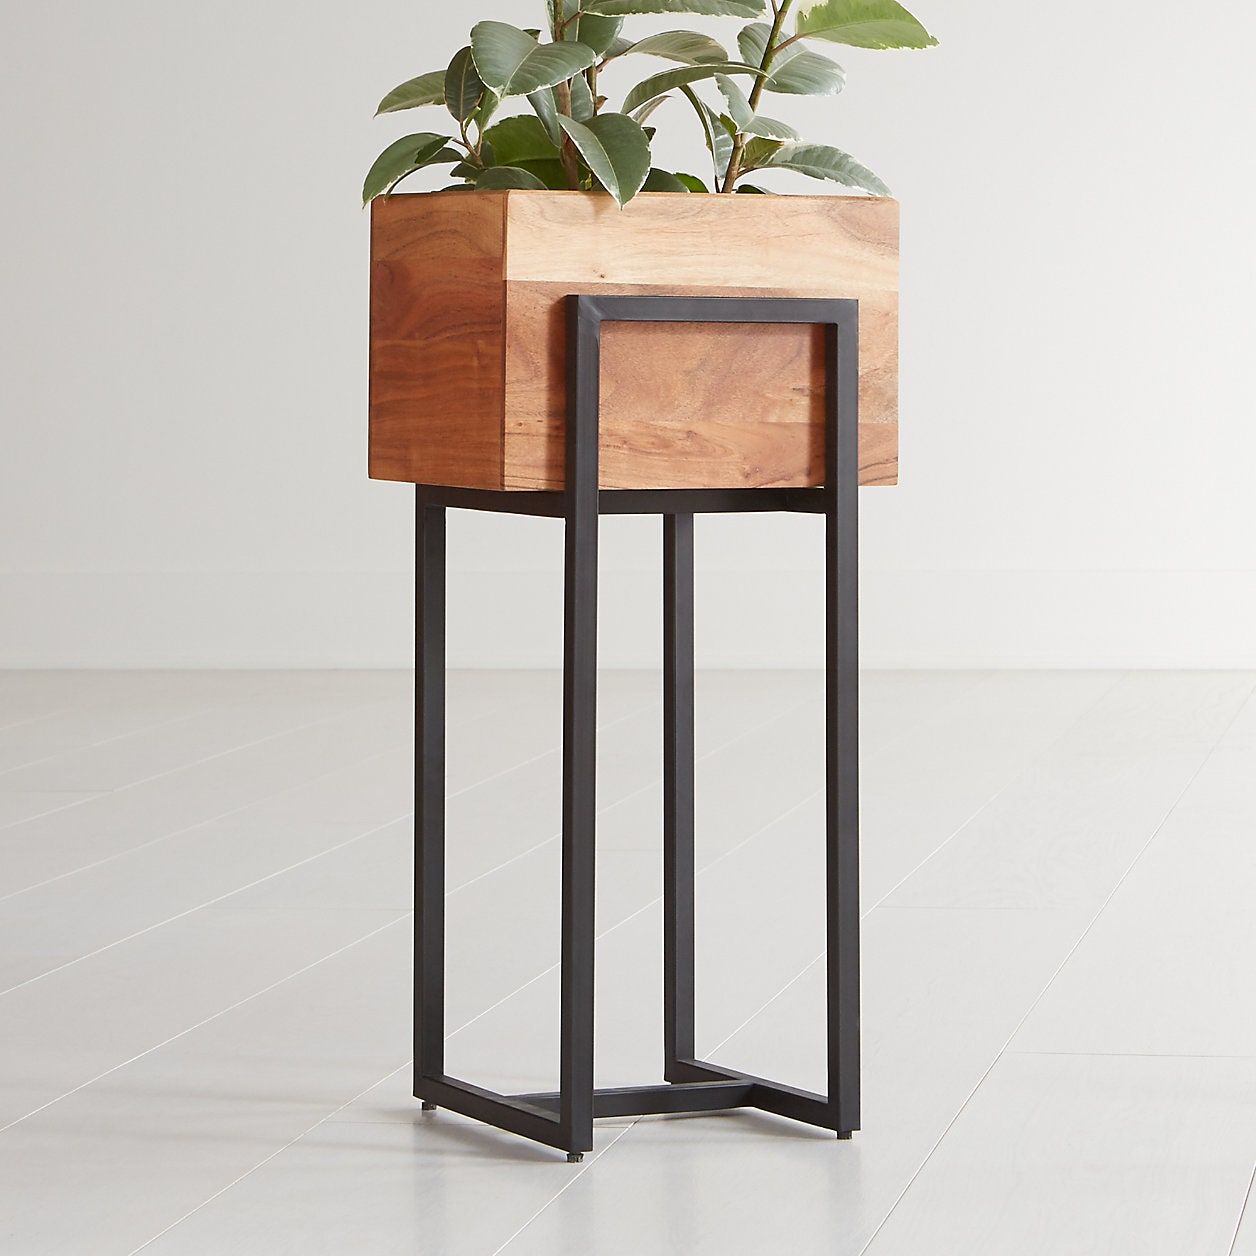 15 Best Indoor Plant Stands That Seriously Stand Out | Architectural Digest Pertaining To Medium Plant Stands (View 14 of 15)